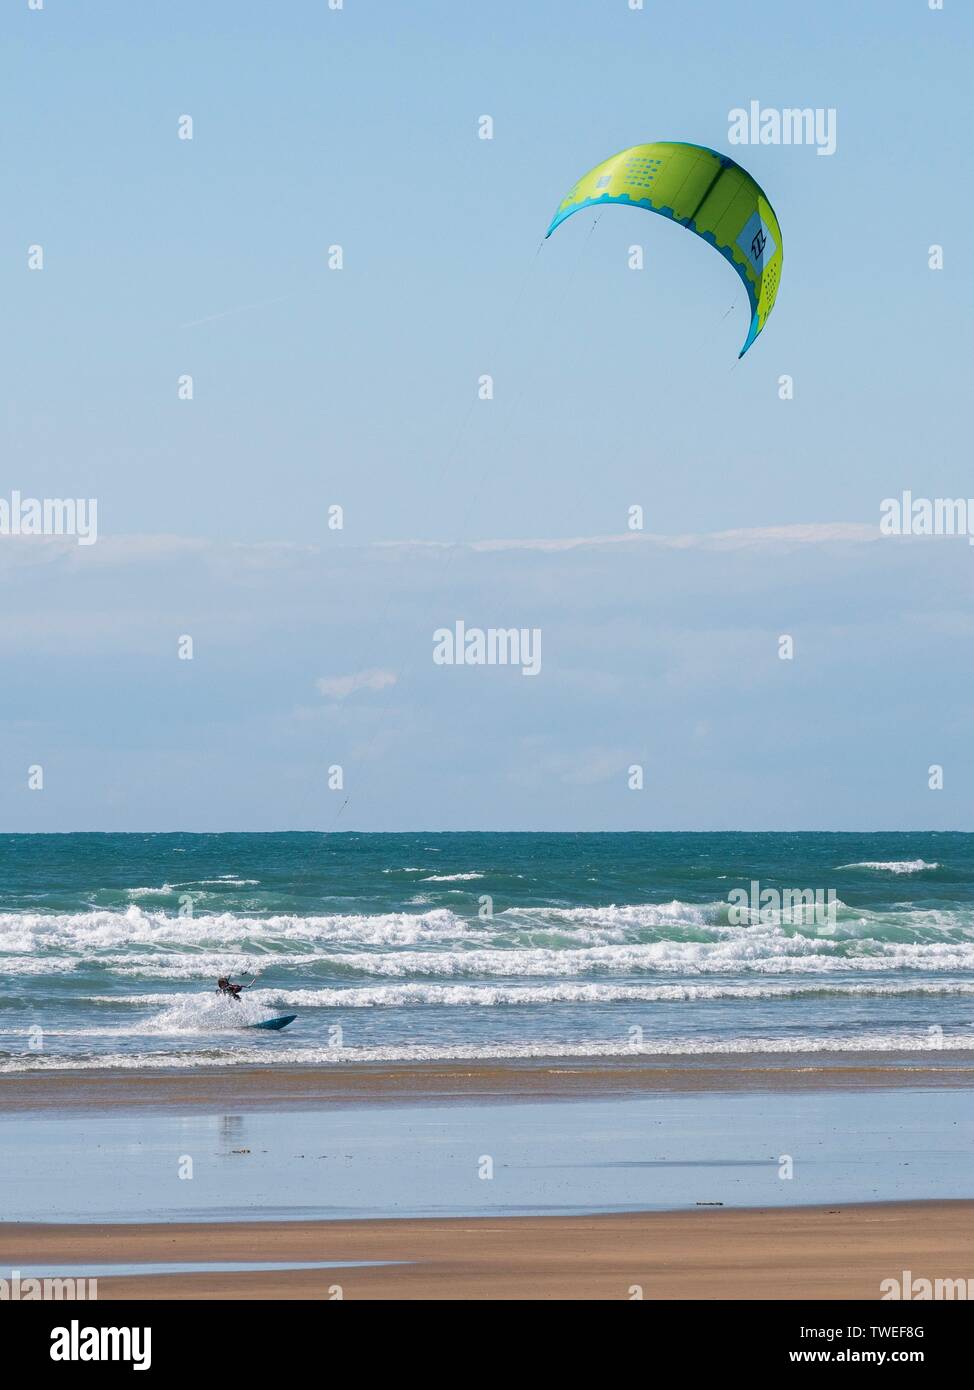 A kiteboarder on the sea at a shallow beach in Devon, UK Stock Photo